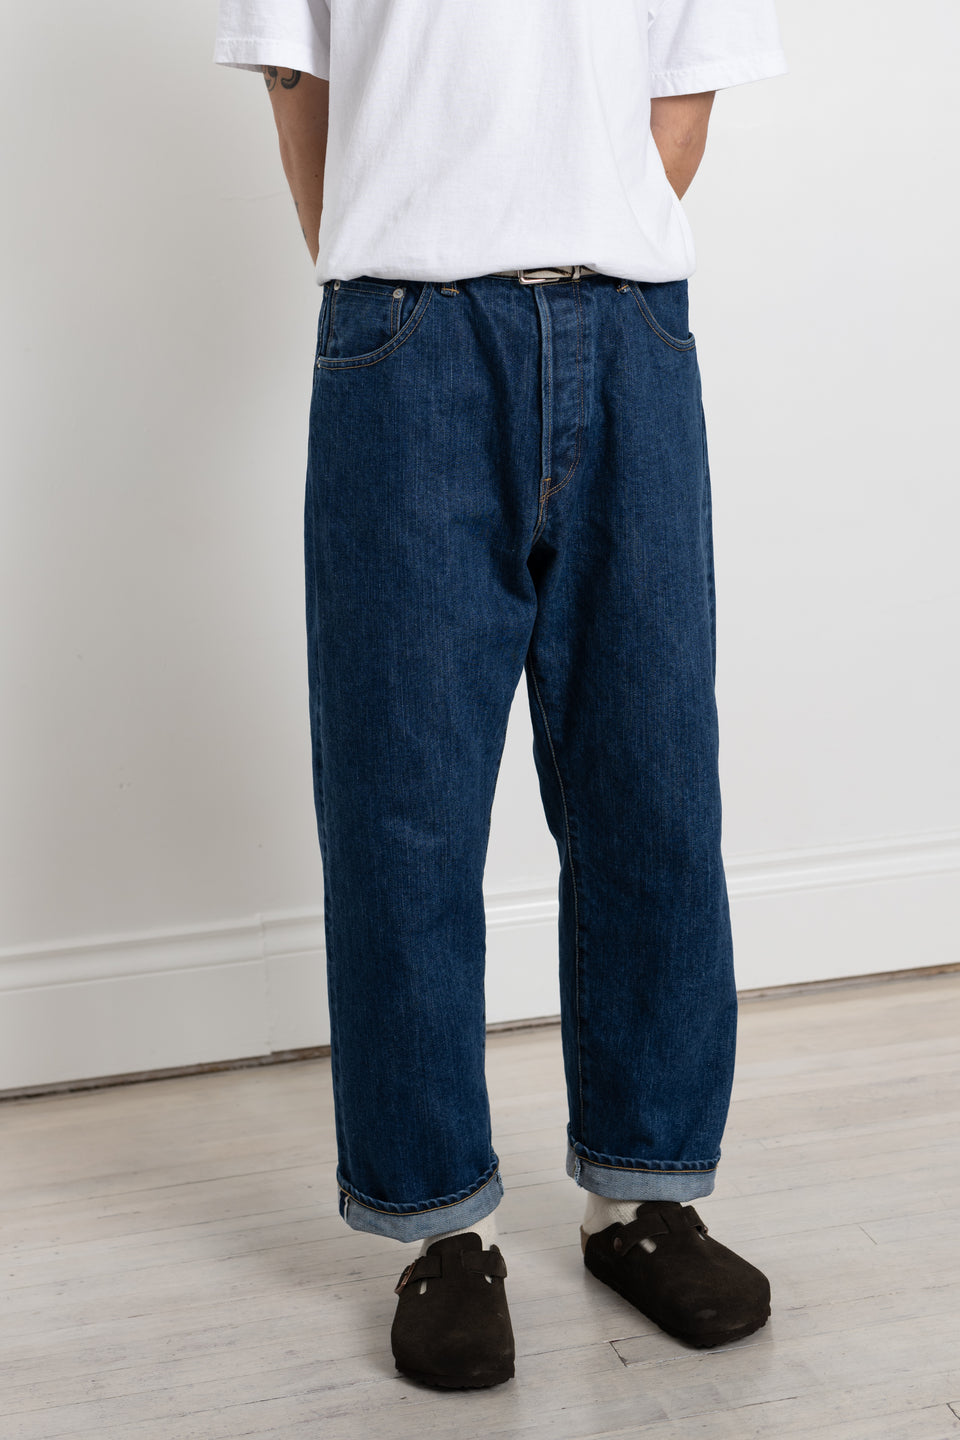 HATSKI Made in Japan Men's Collection FW23 Wide Tapered Selvedge Denim Used Calculus Victoria BC Canada